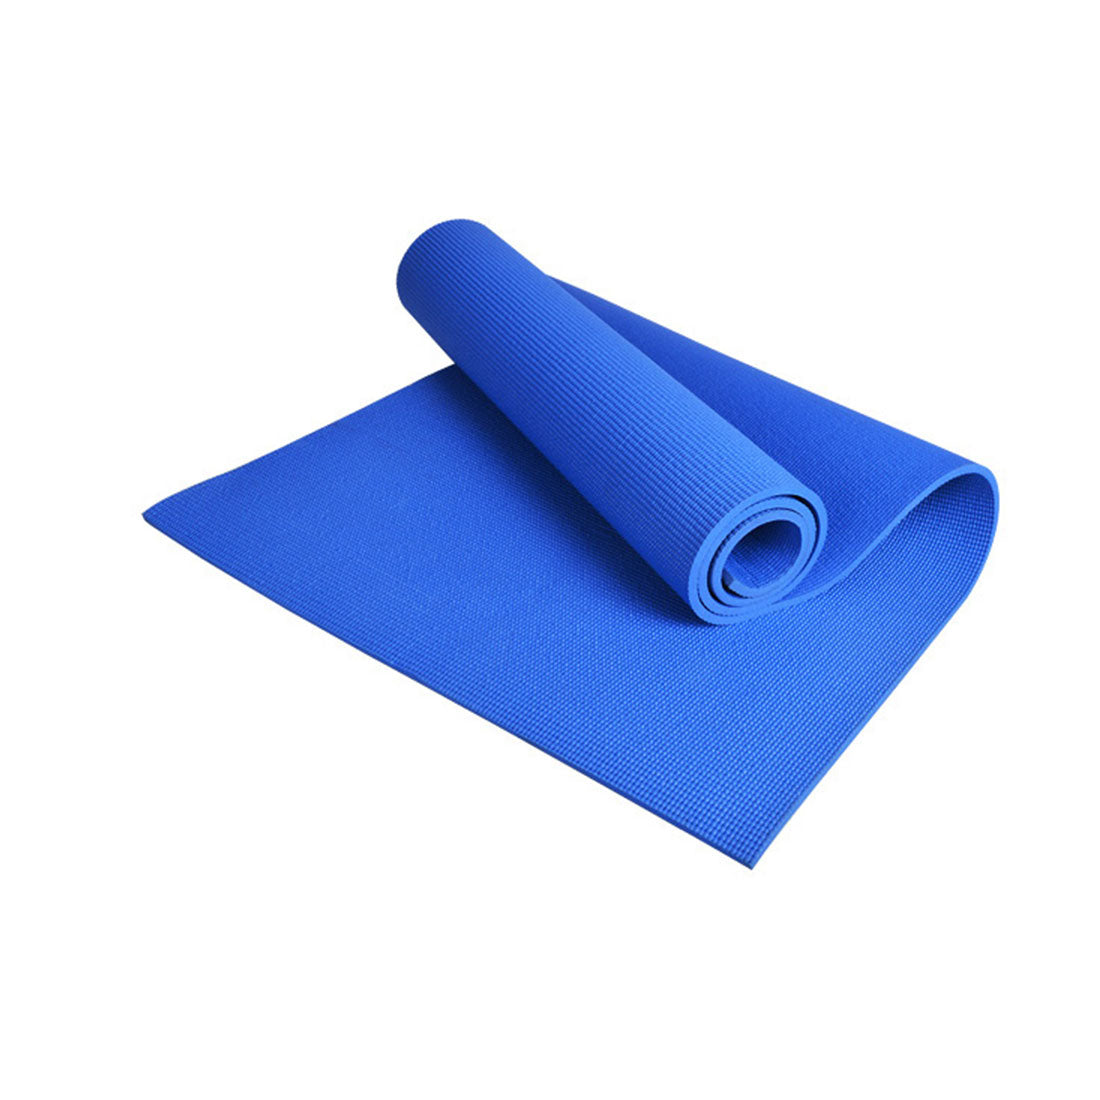 Extra Thick 6mm PVC Yoga Gym Pilate Mat Fitness Non Slip Exercise Board - blue